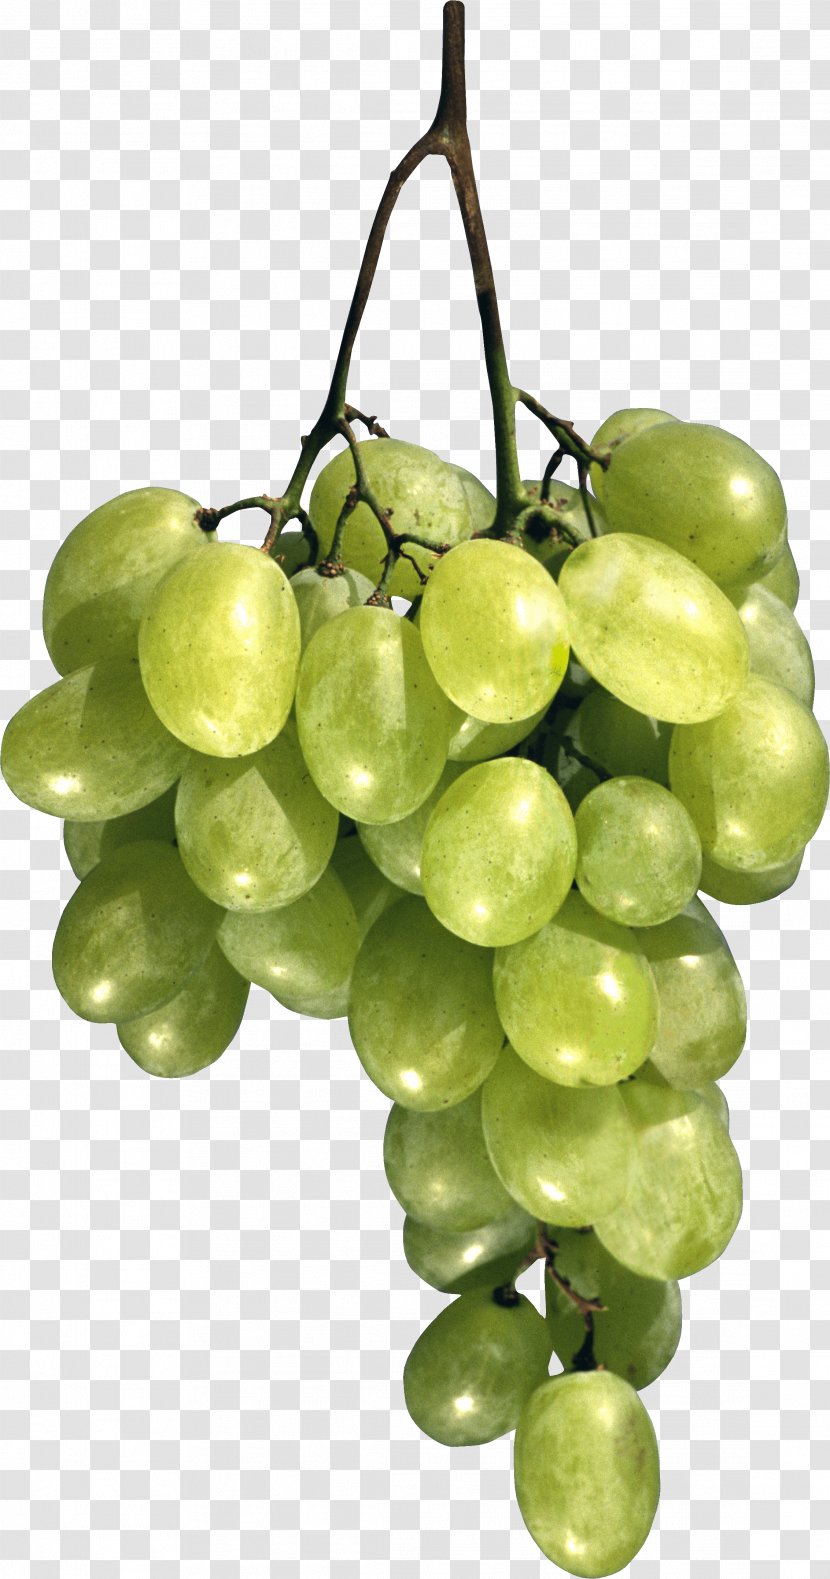 Common Grape Vine Moscow Cafe Breakfast - Produce - Green Image Transparent PNG